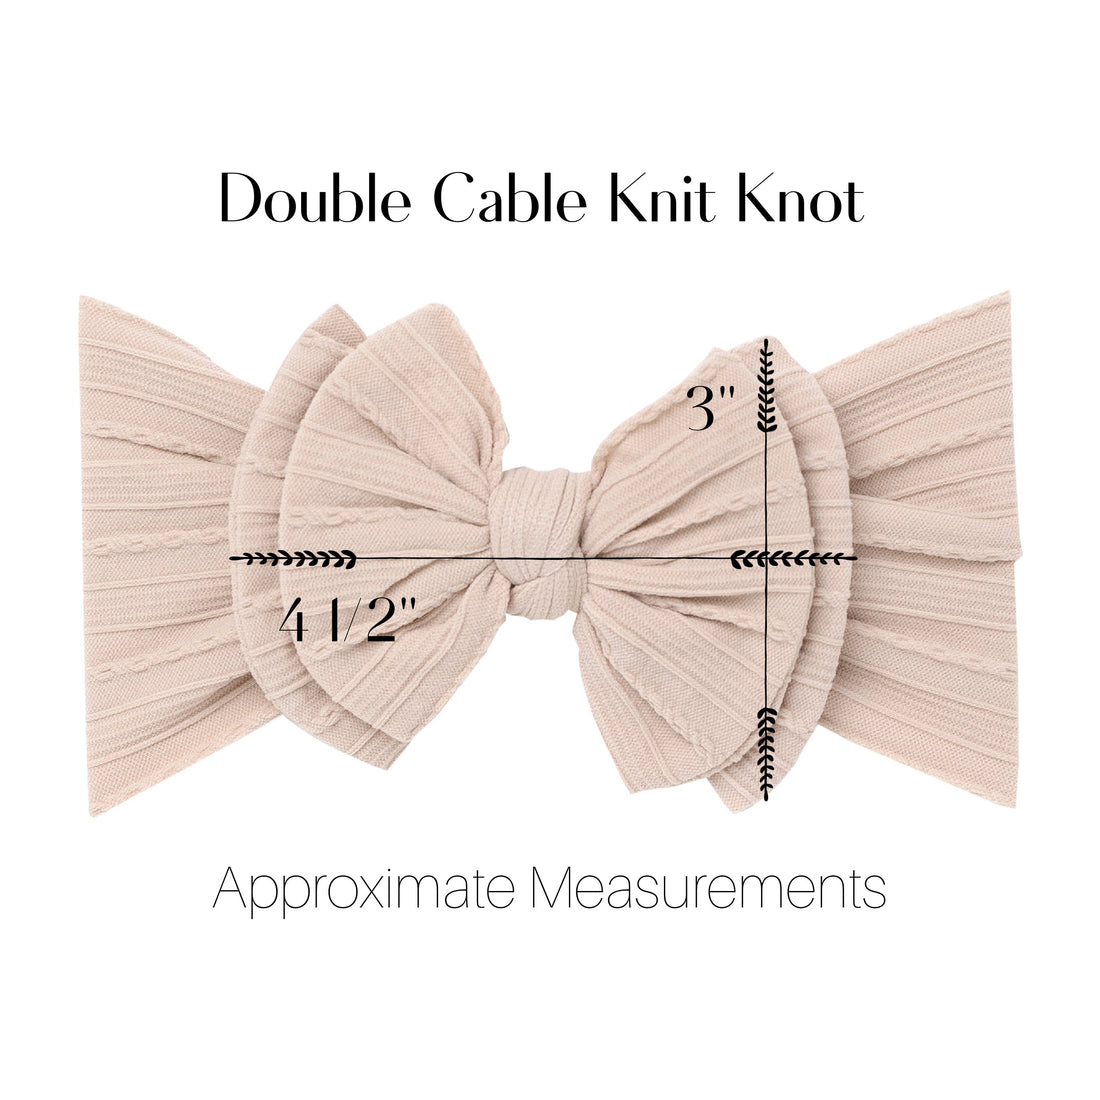 Double Cable Knit Knot - Flower Basket